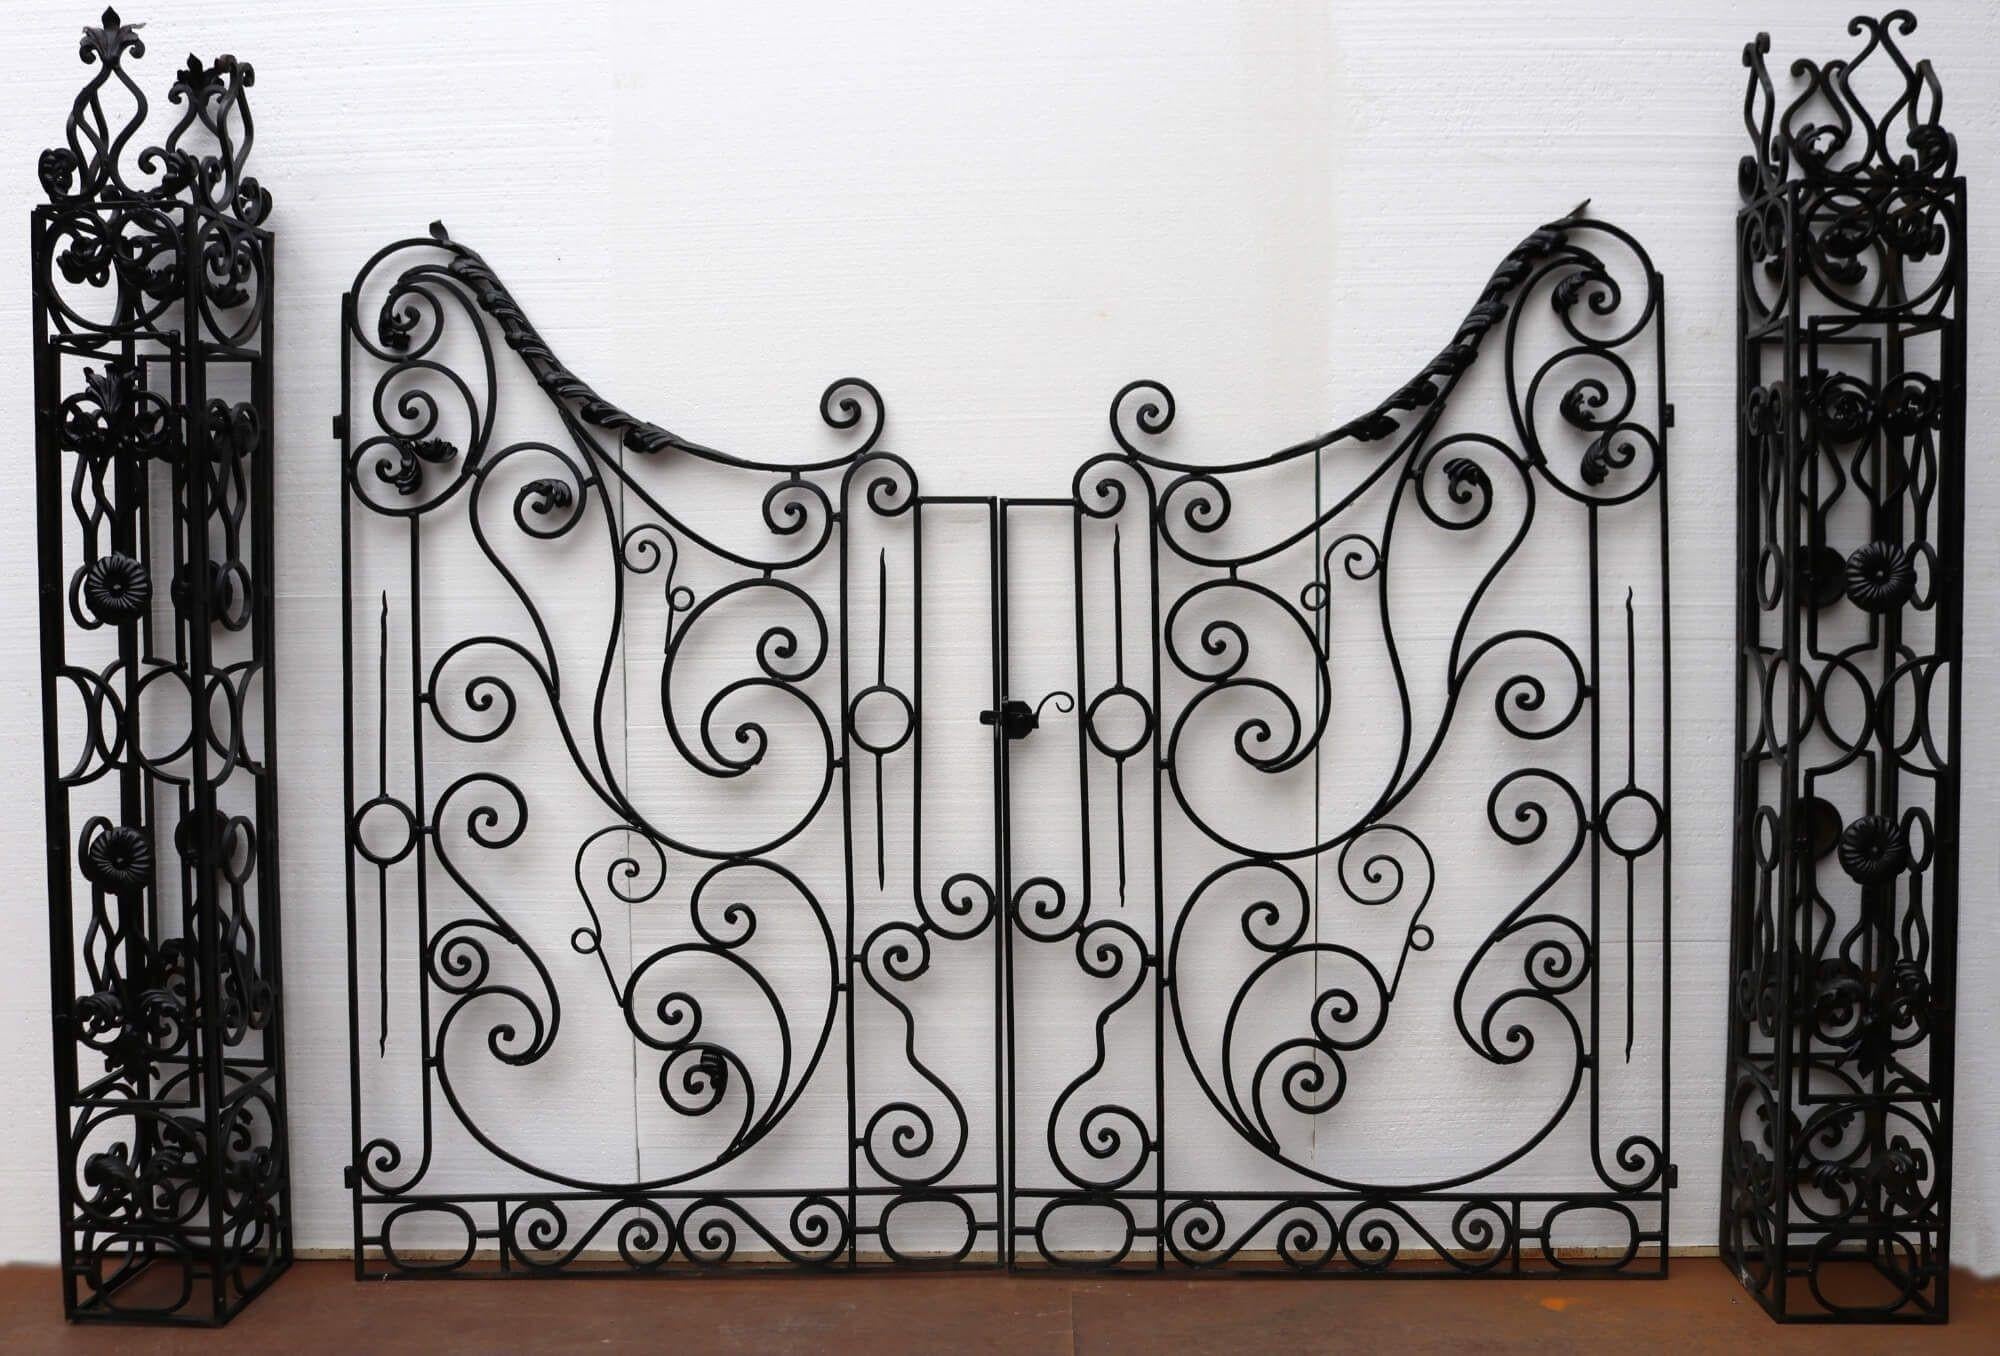 Set of Ornate Wrought Iron Driveway Gates and Posts 288 cm (9’5”) In Fair Condition For Sale In Wormelow, Herefordshire